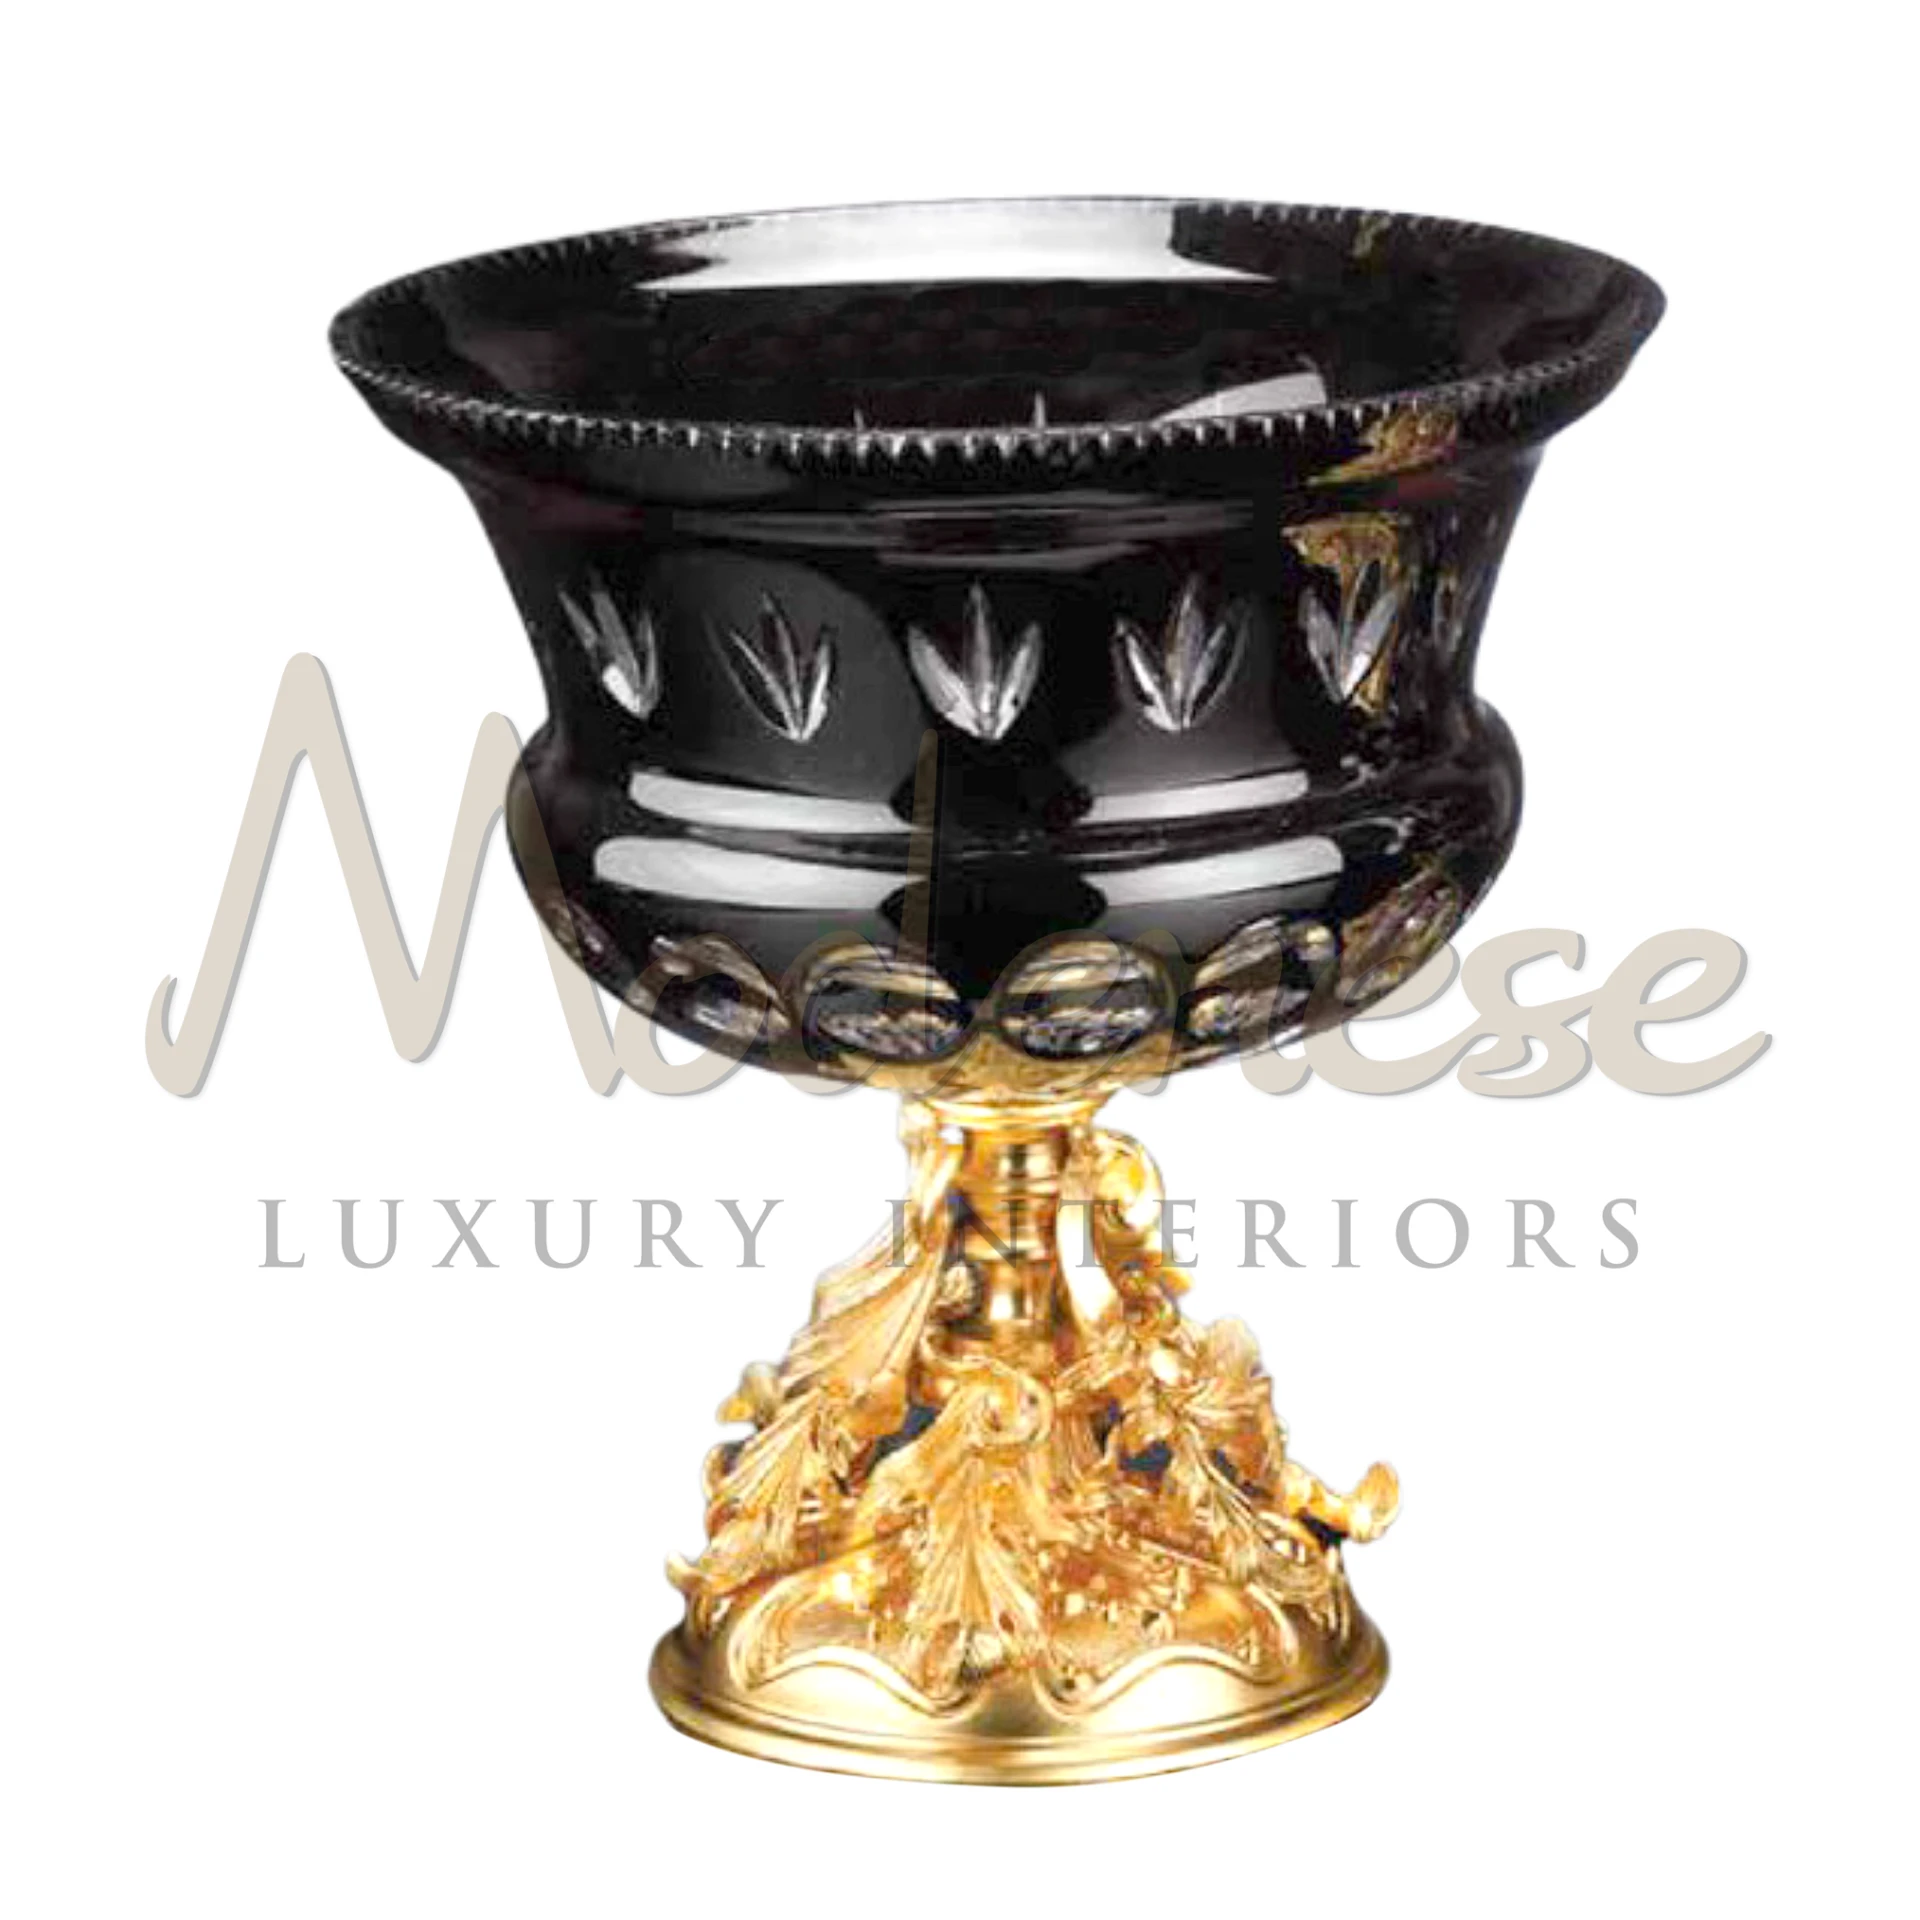 Imperial Pedestal Black Bowl, showcasing luxury and elegance with its intricate pedestal base and striking black material, ideal for high-end interior design.






